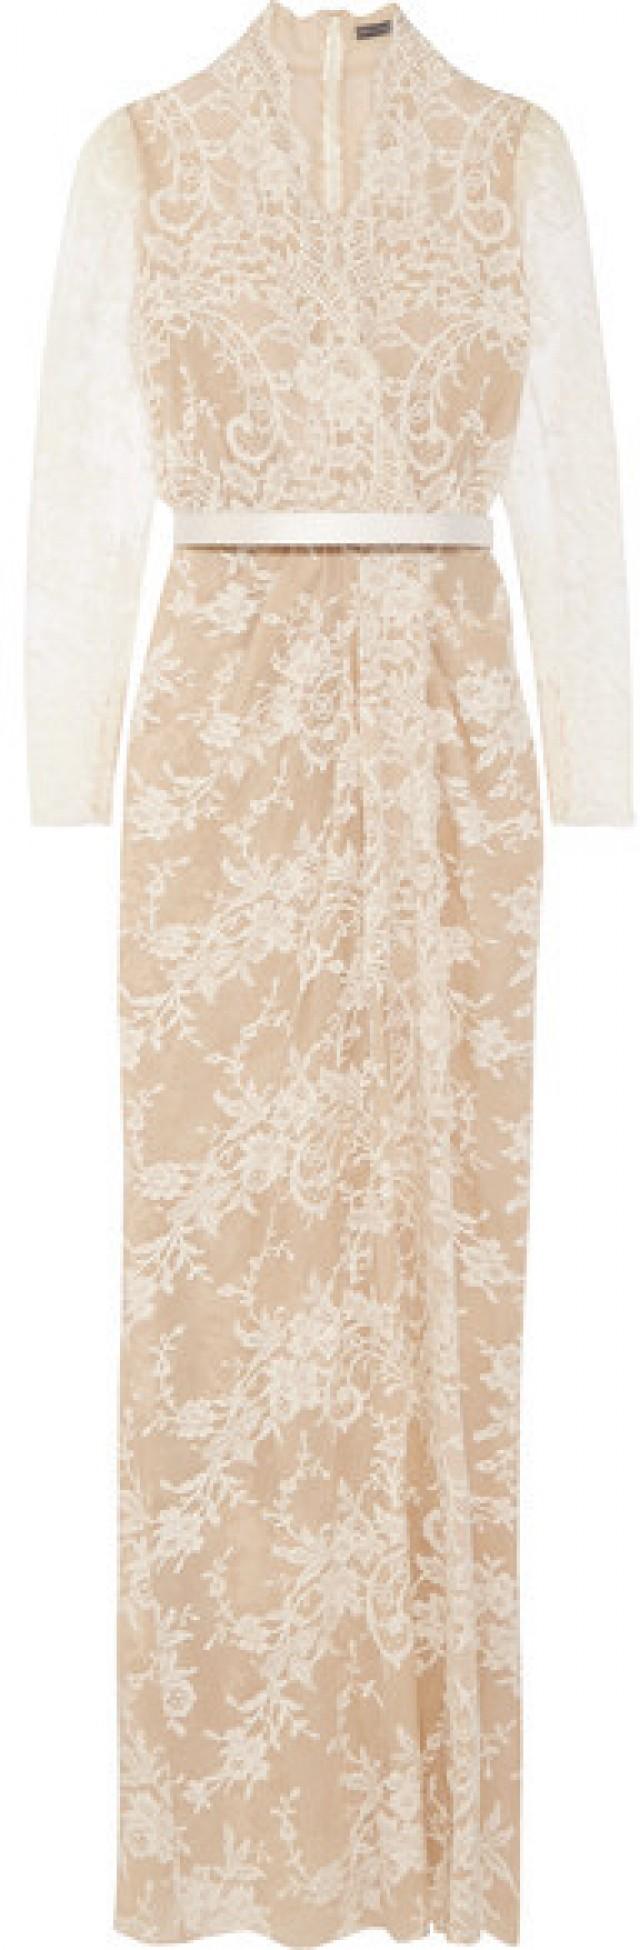 Alexander McQueen - Cotton-blend Lace Gown - Ivory